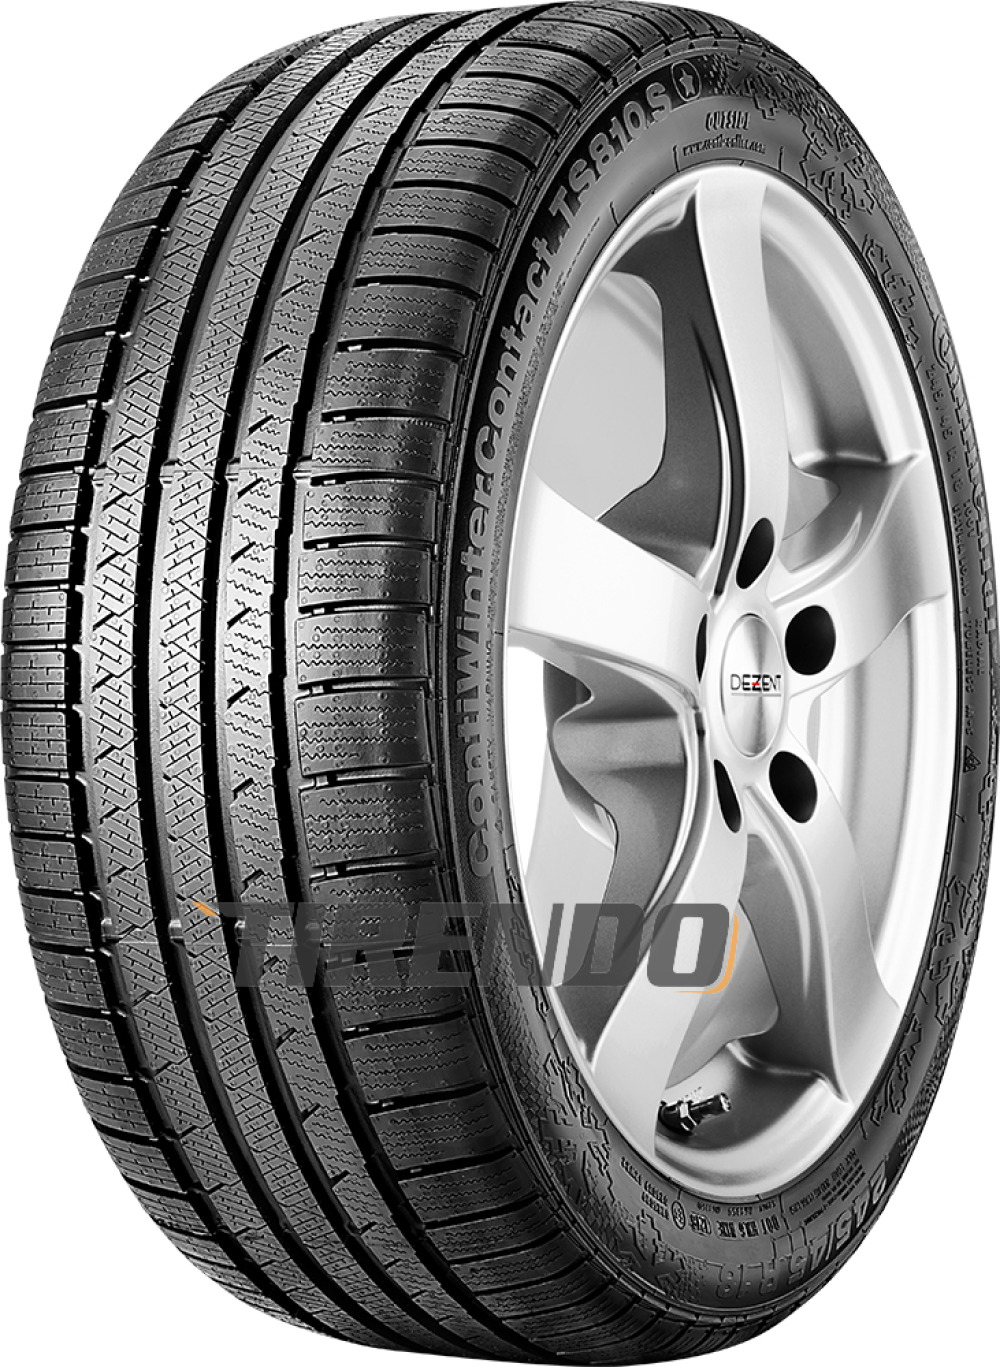 Continental ContiWinterContact TS 810 S ( 235/55 R17 99V, MO, mit Leiste )